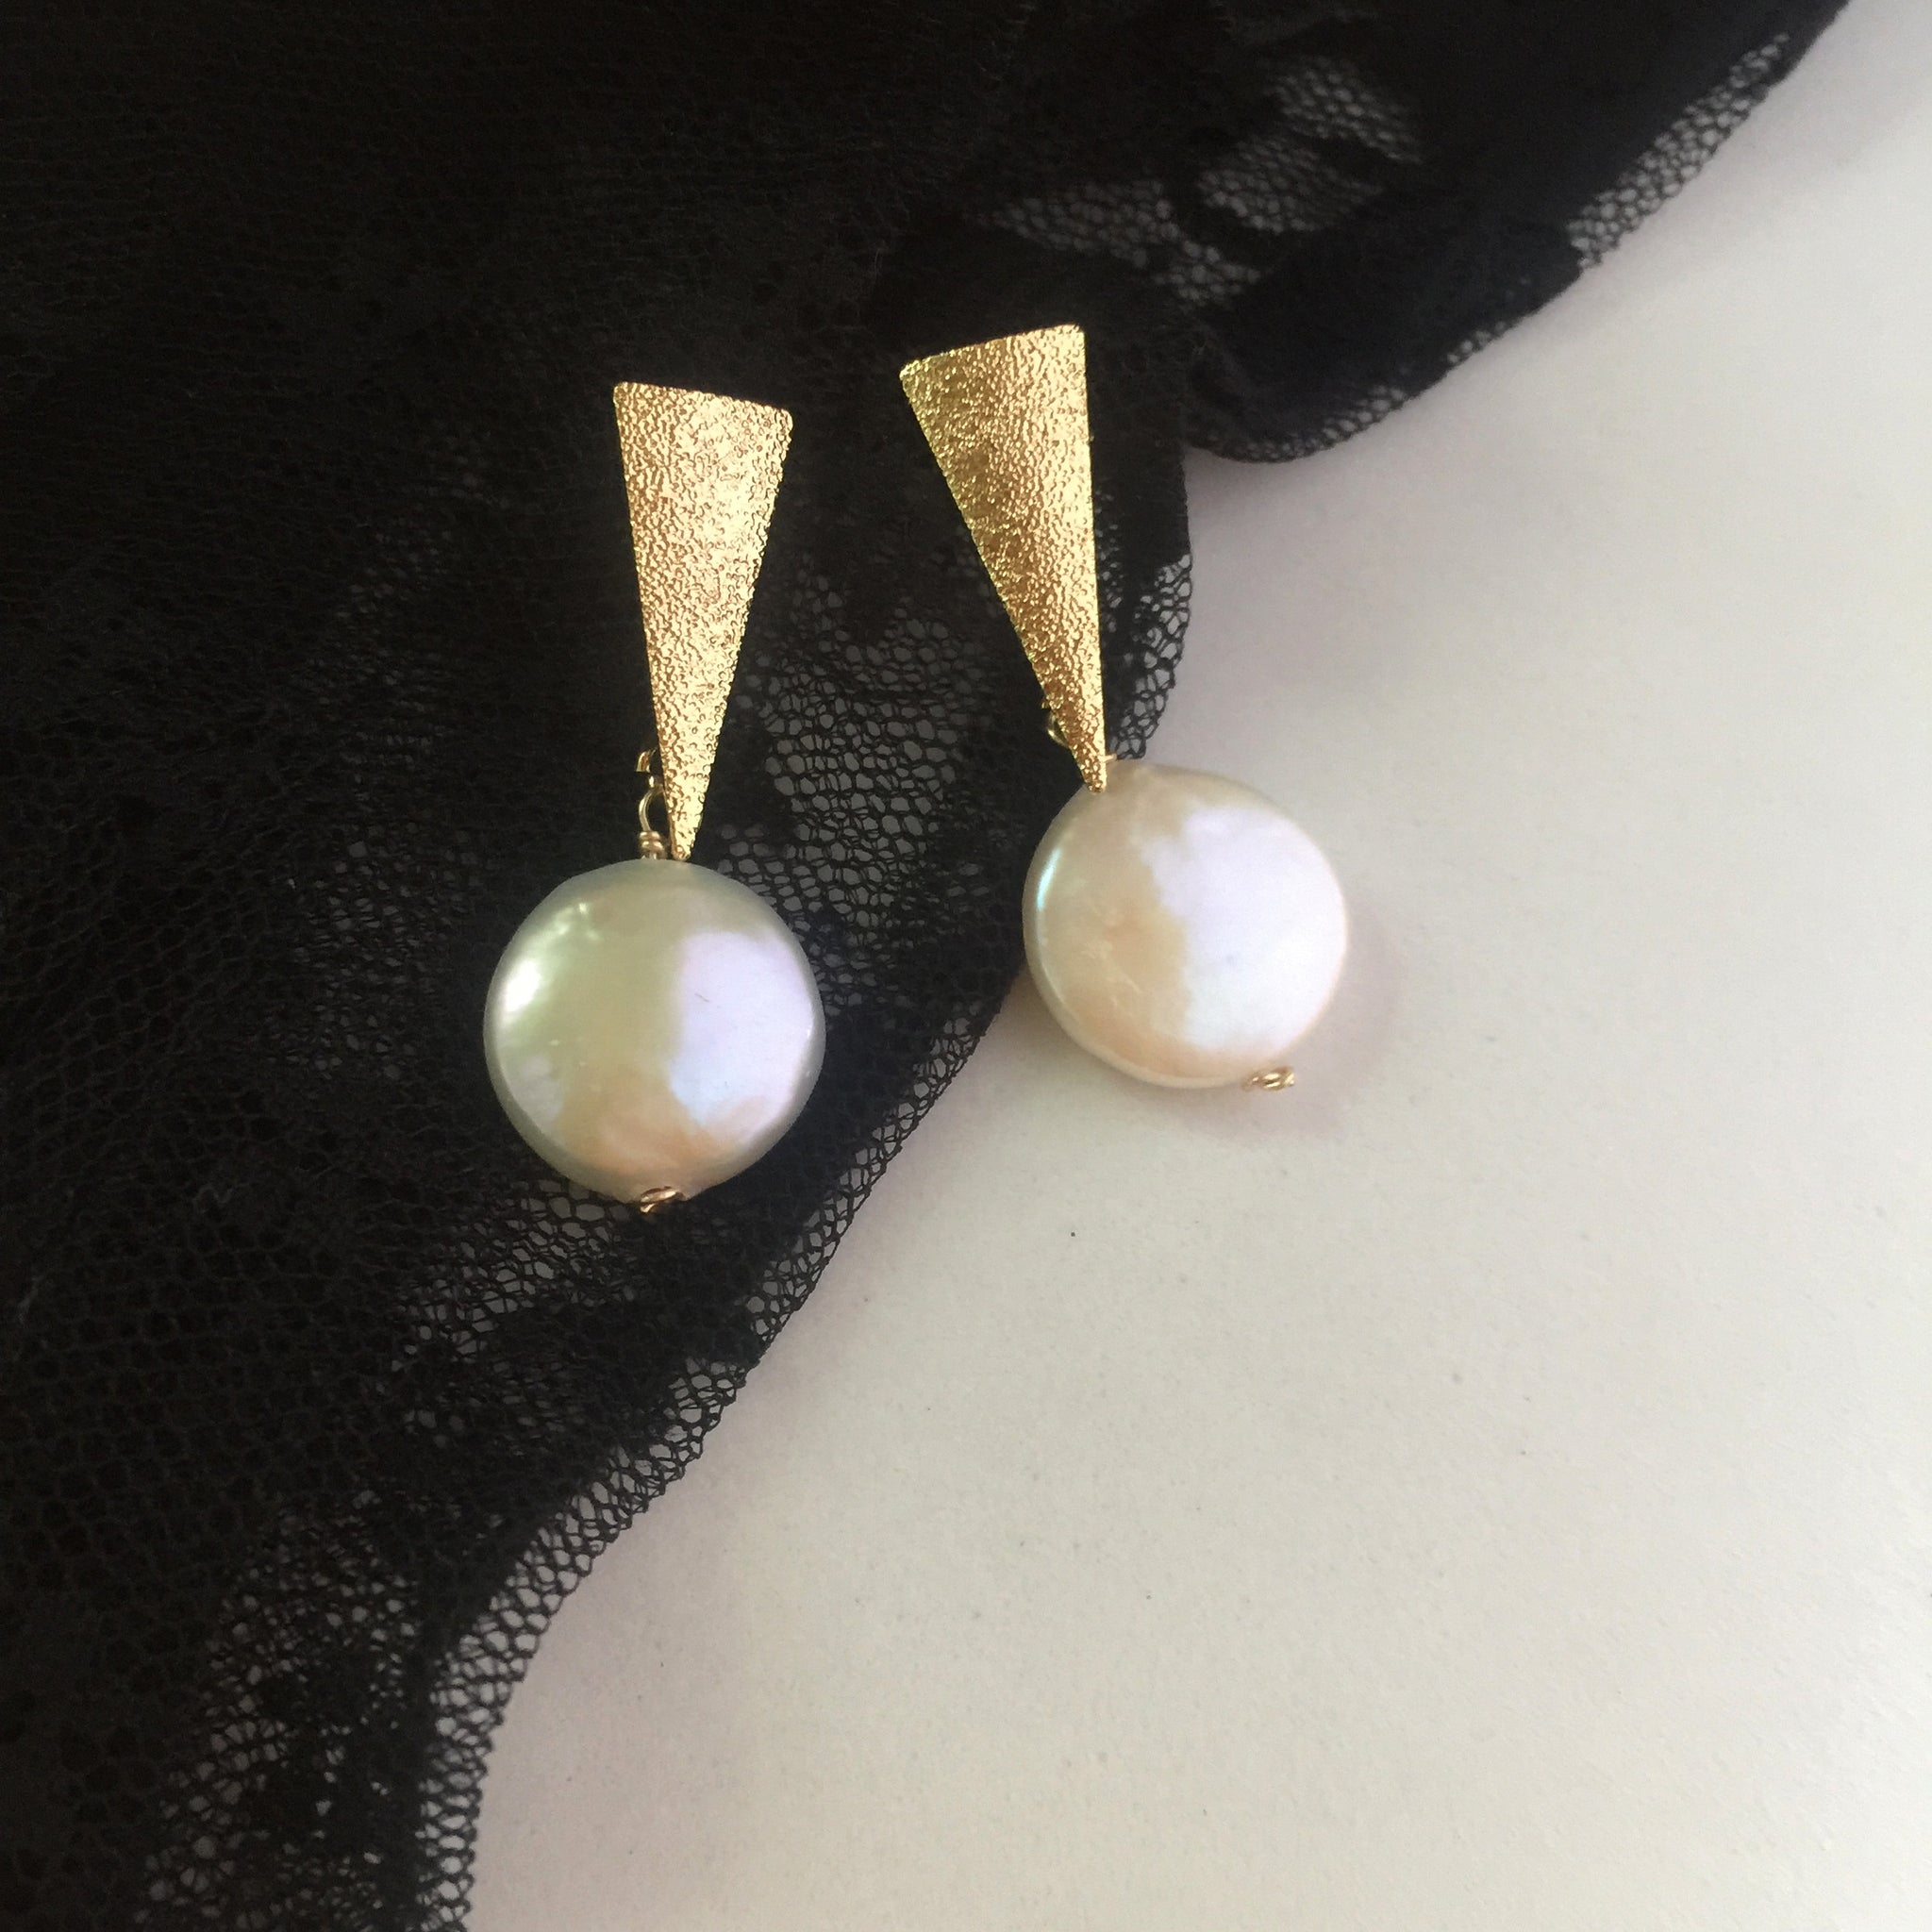 Buy NUOFENG first-class 8MM/10MM/12MM Fashion Pearl Earrings Natural  Freshwater Pearl Dorp Earring Silver Pearl Jewelry for Women Gift(None 2  Pure white copper 10mm pair price) at Amazon.in